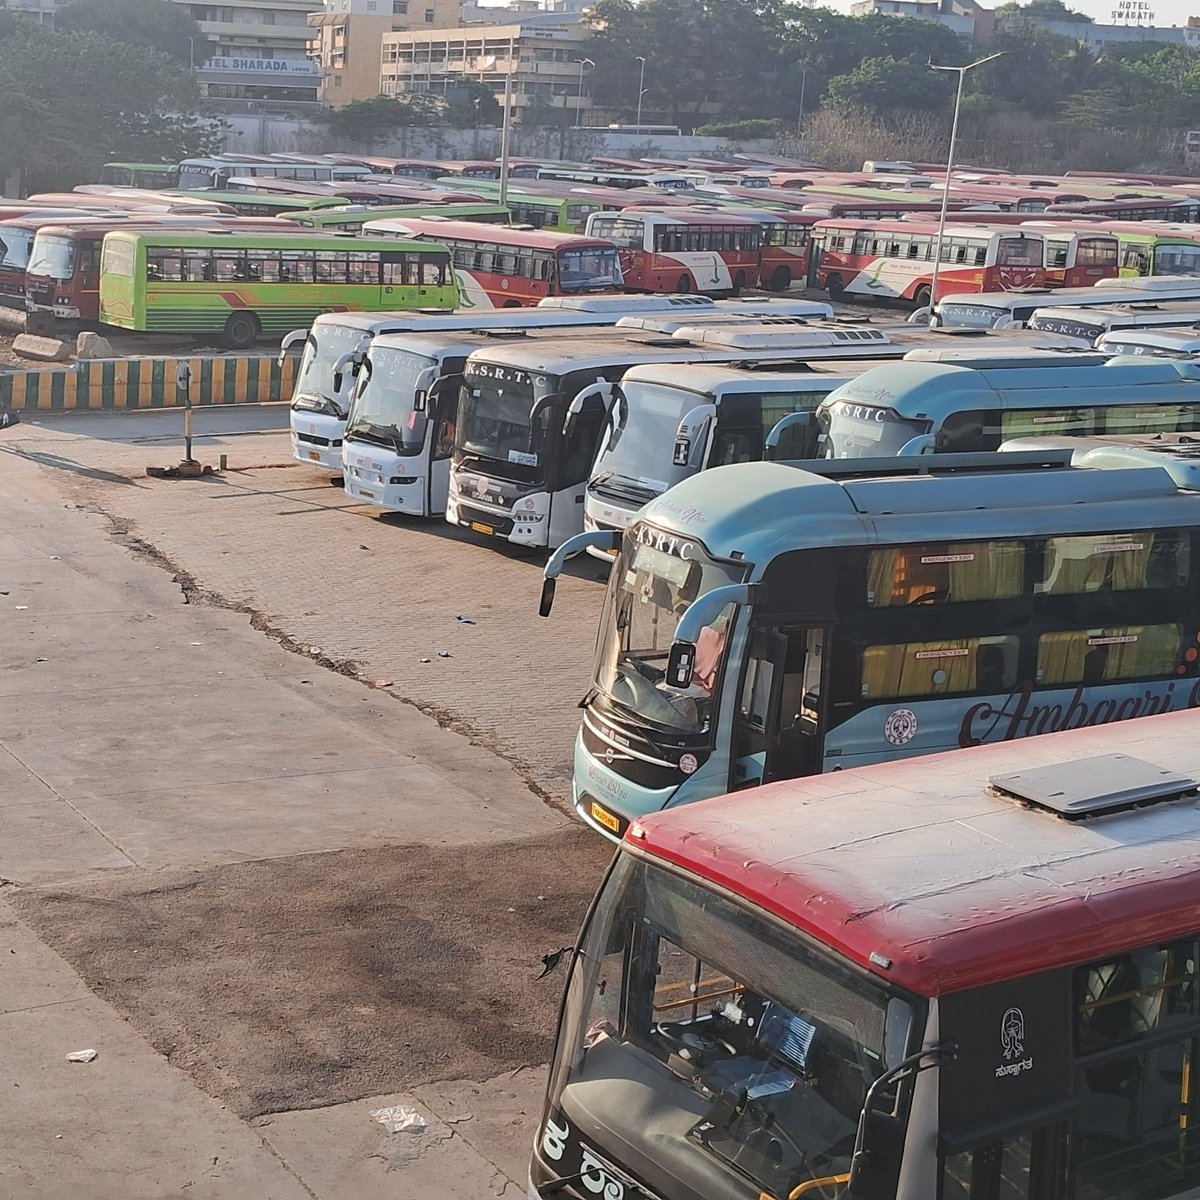 Kempegowda Bus Station, is a major transportation hub in the city. It serves as a central point for both intra and inter-city bus services, connecting #Bengaluru to various destinations within Karnataka and neighboring states. Morning  click